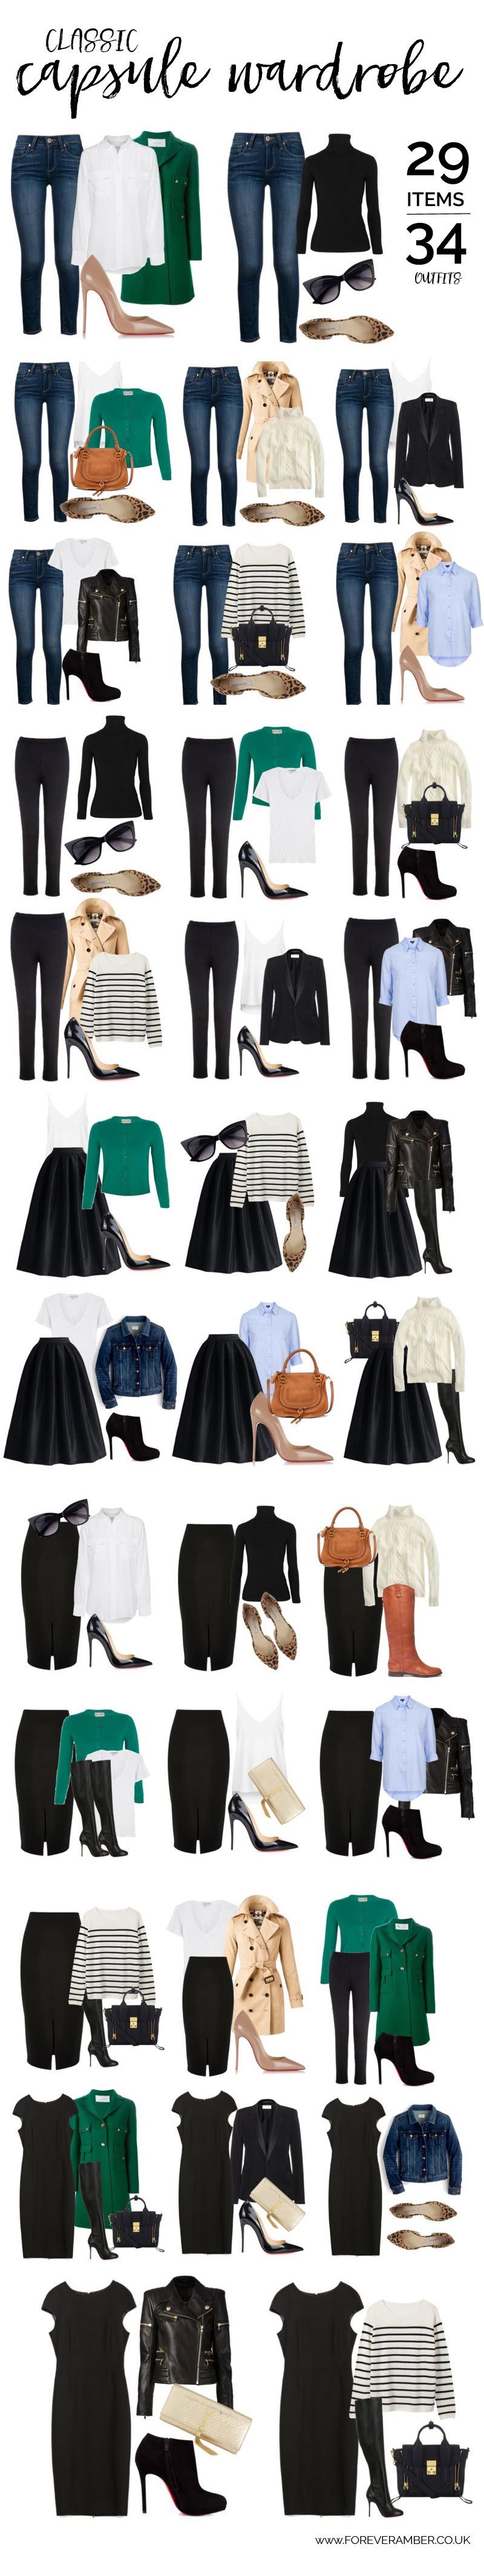 classic capsule wardrobe: 34 outfits from a selection of wardrobe essentials